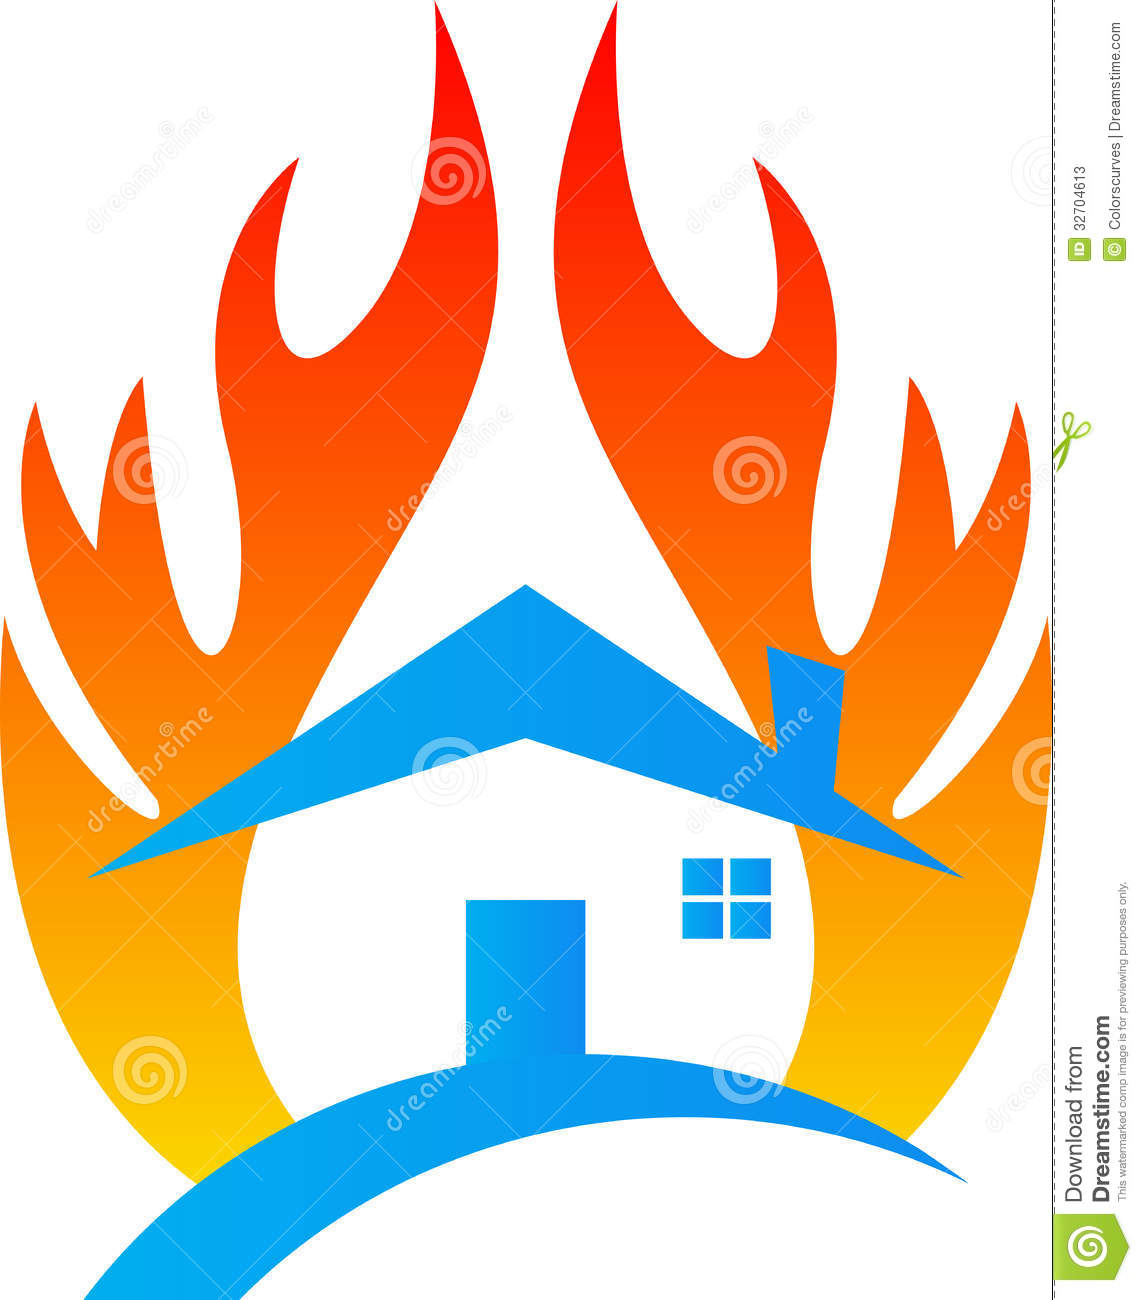 House On Fire Clip Art   Clipart Panda   Free Clipart Images